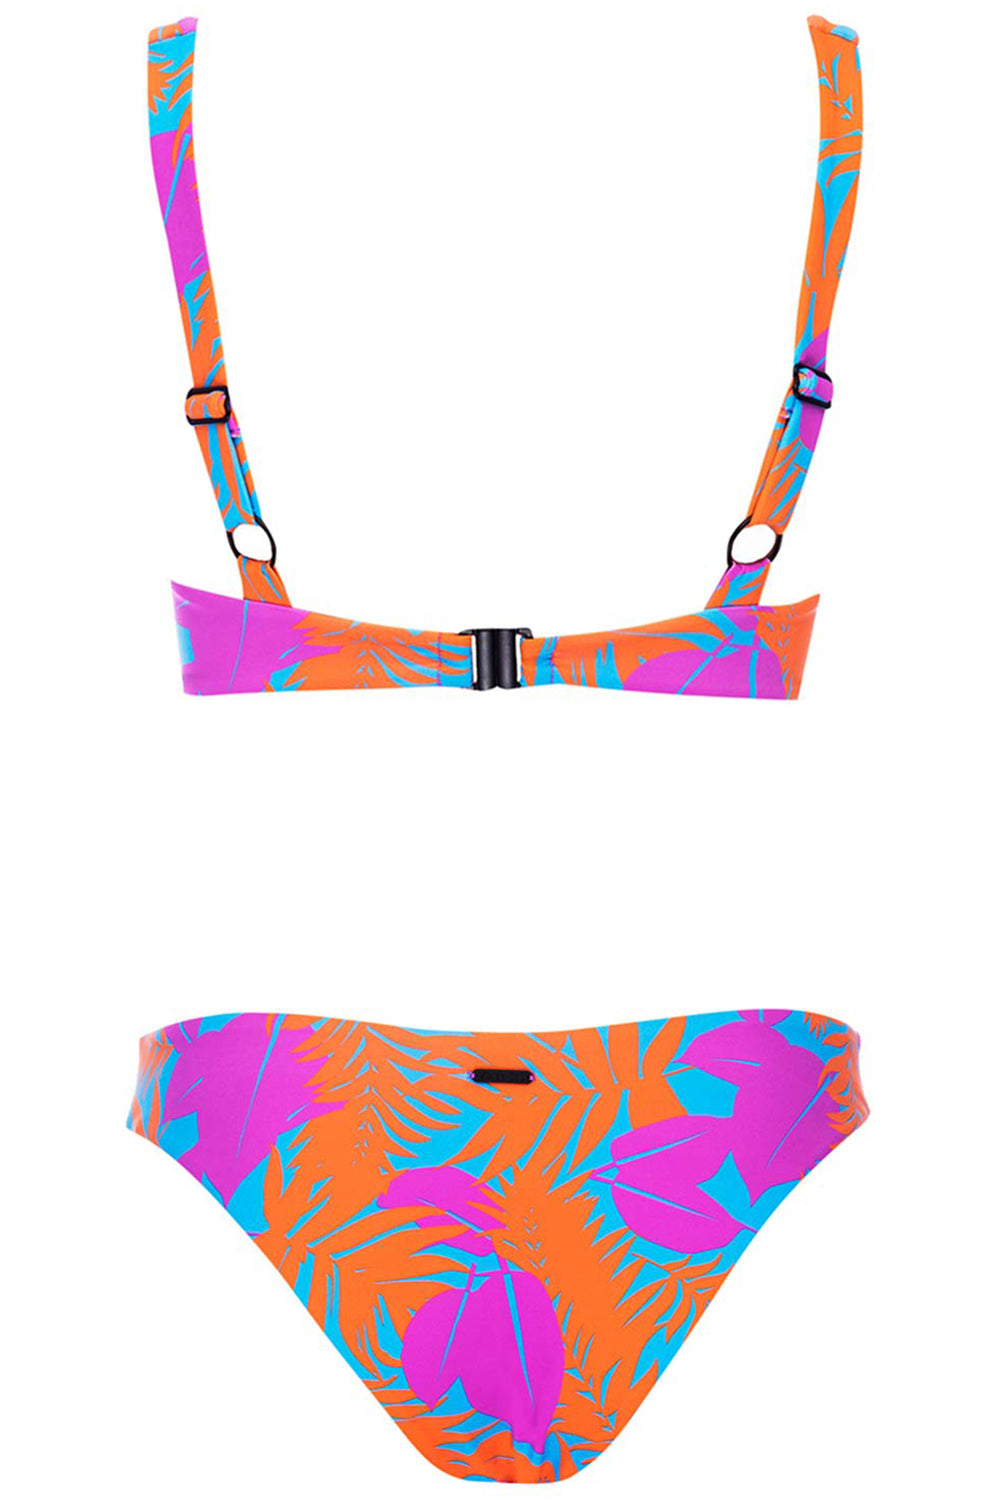 Back view of the  Laguna Bikini Tropical Set. The top wear has adjustable shoulder straps at the back. 